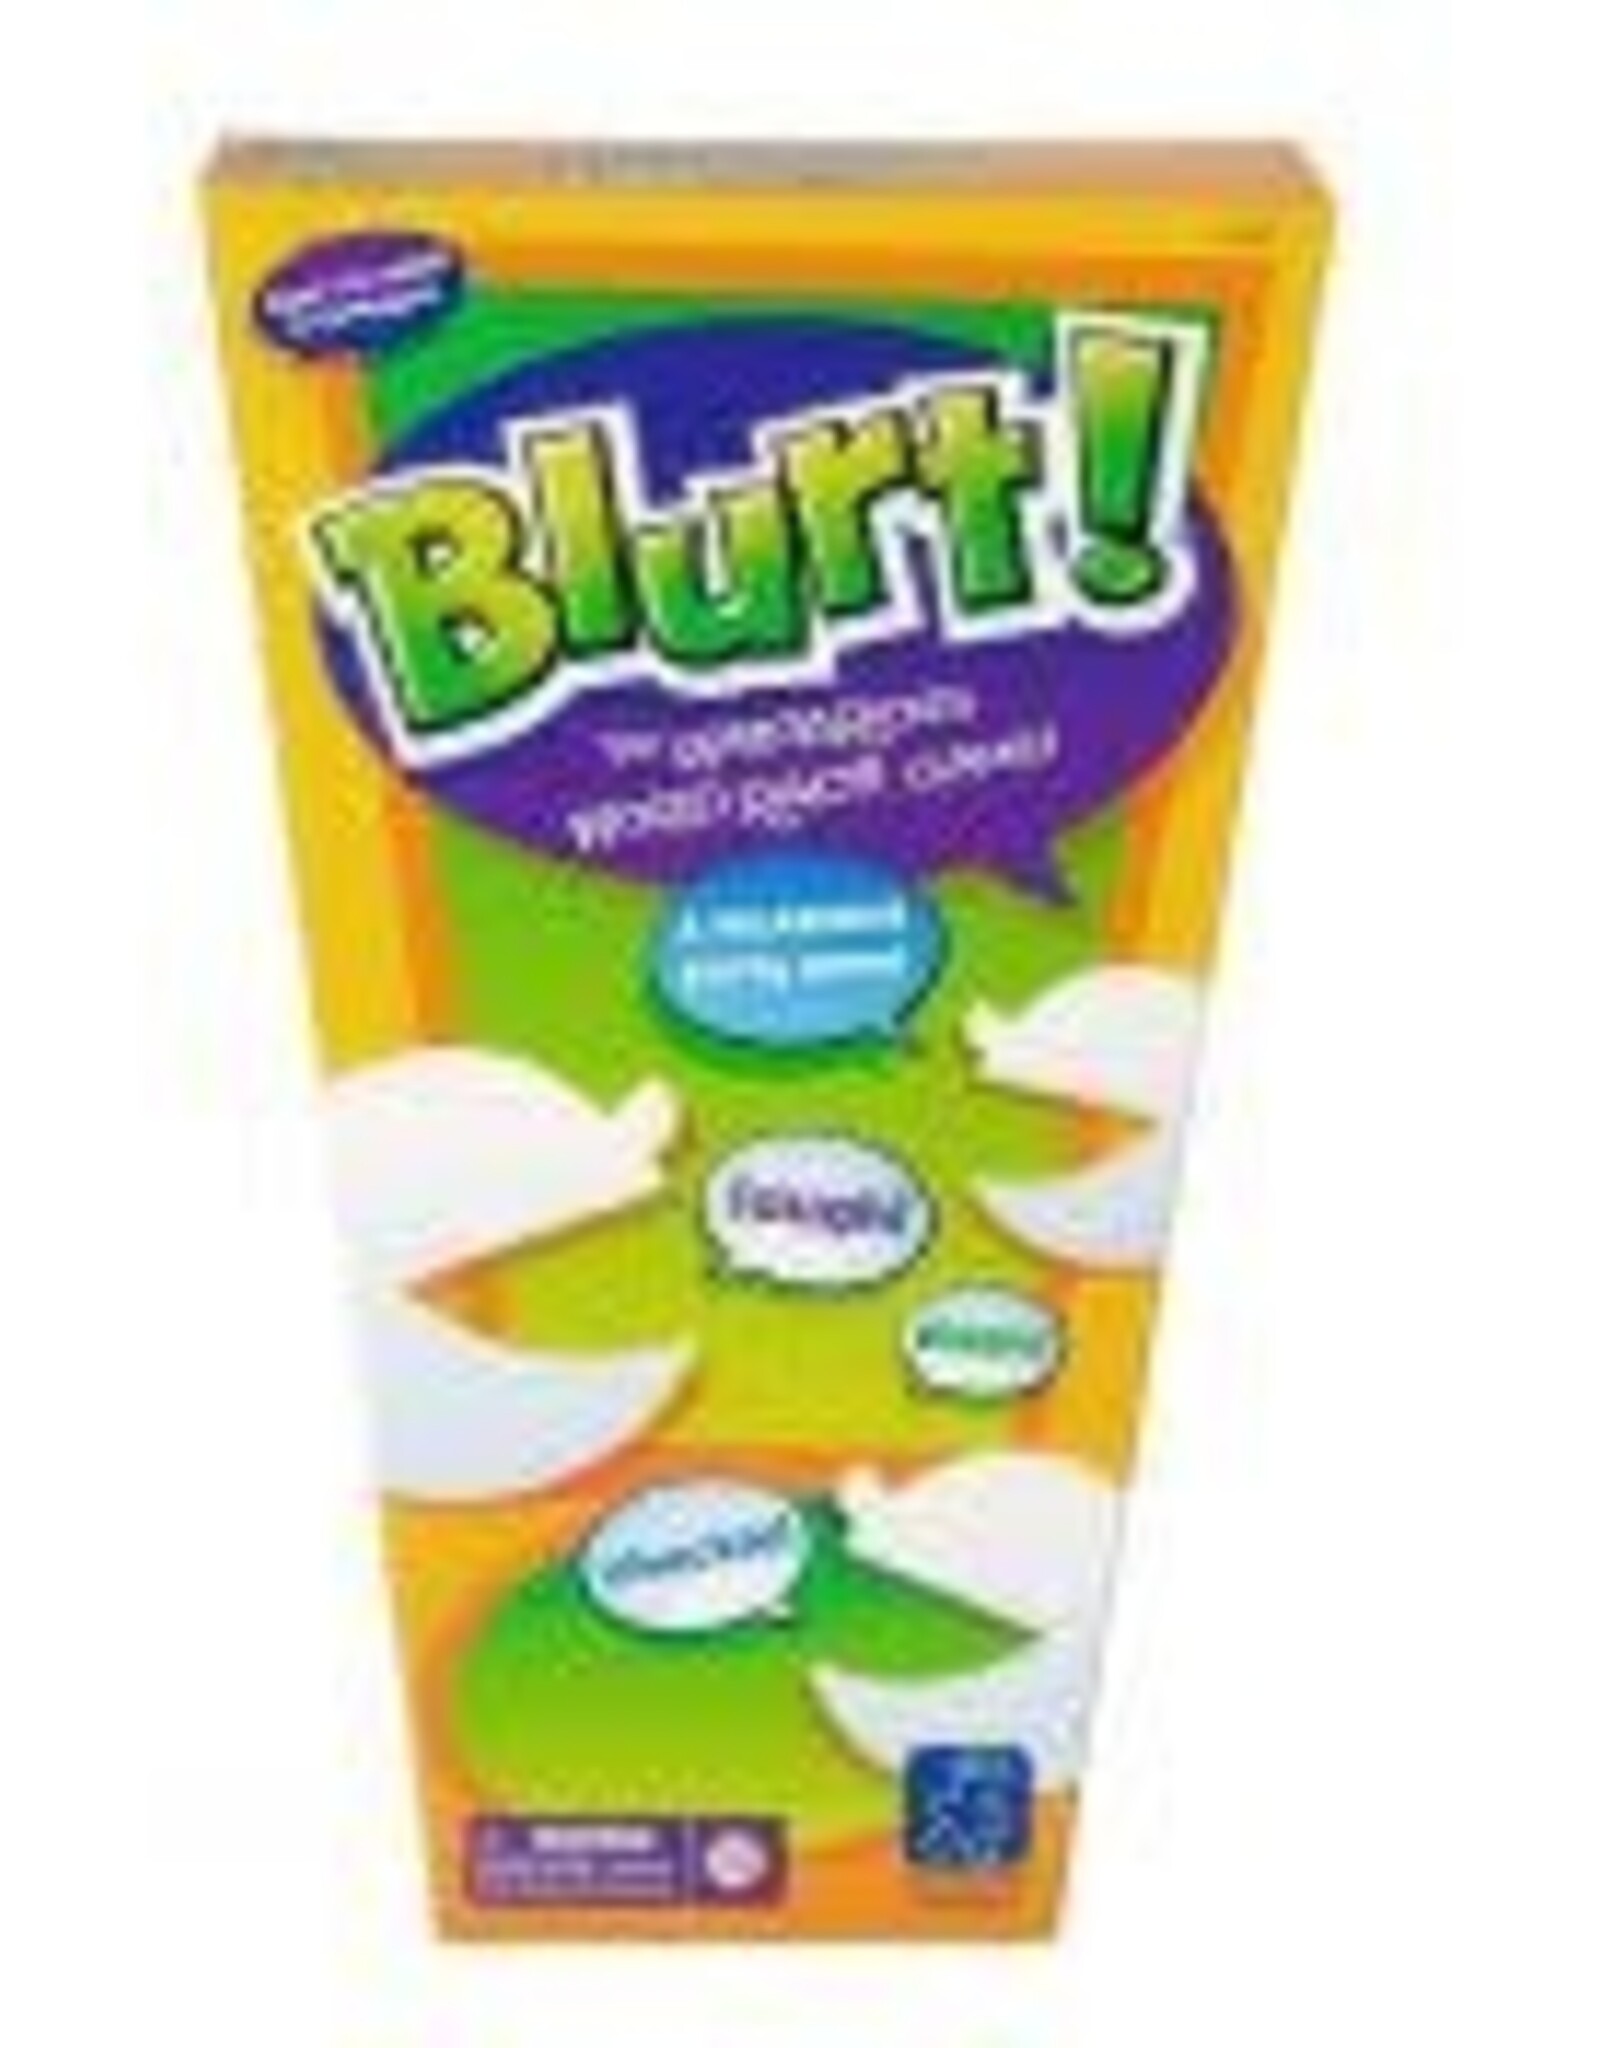 LEARNING RESOURCES BLURT